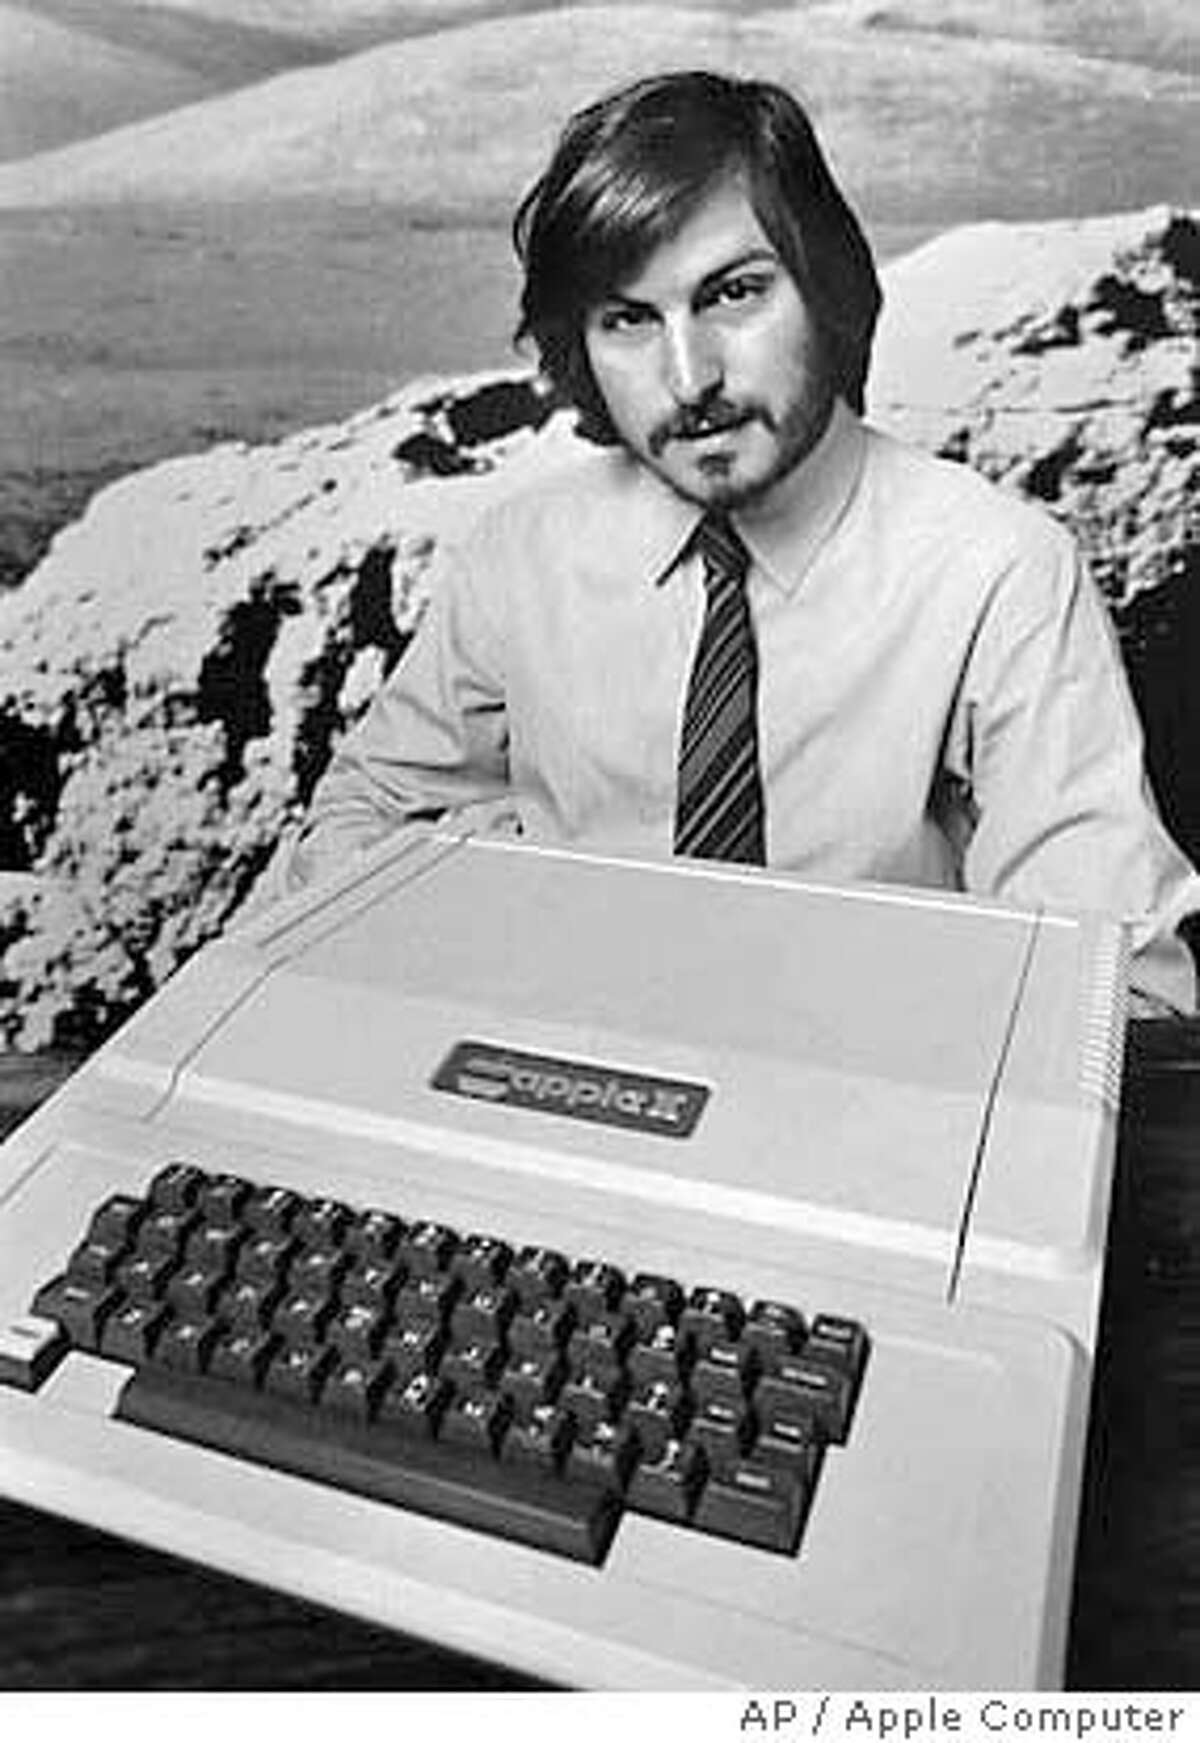 This is a 1977 photo of Apple Computer Inc. founder Steve Jobs as he introduces the new Apple II in Cupertino, Calif. Apple Computer was formed 20 years ago, on April Fool's Day in 1976. (AP Photo/Apple Computers Inc., file)